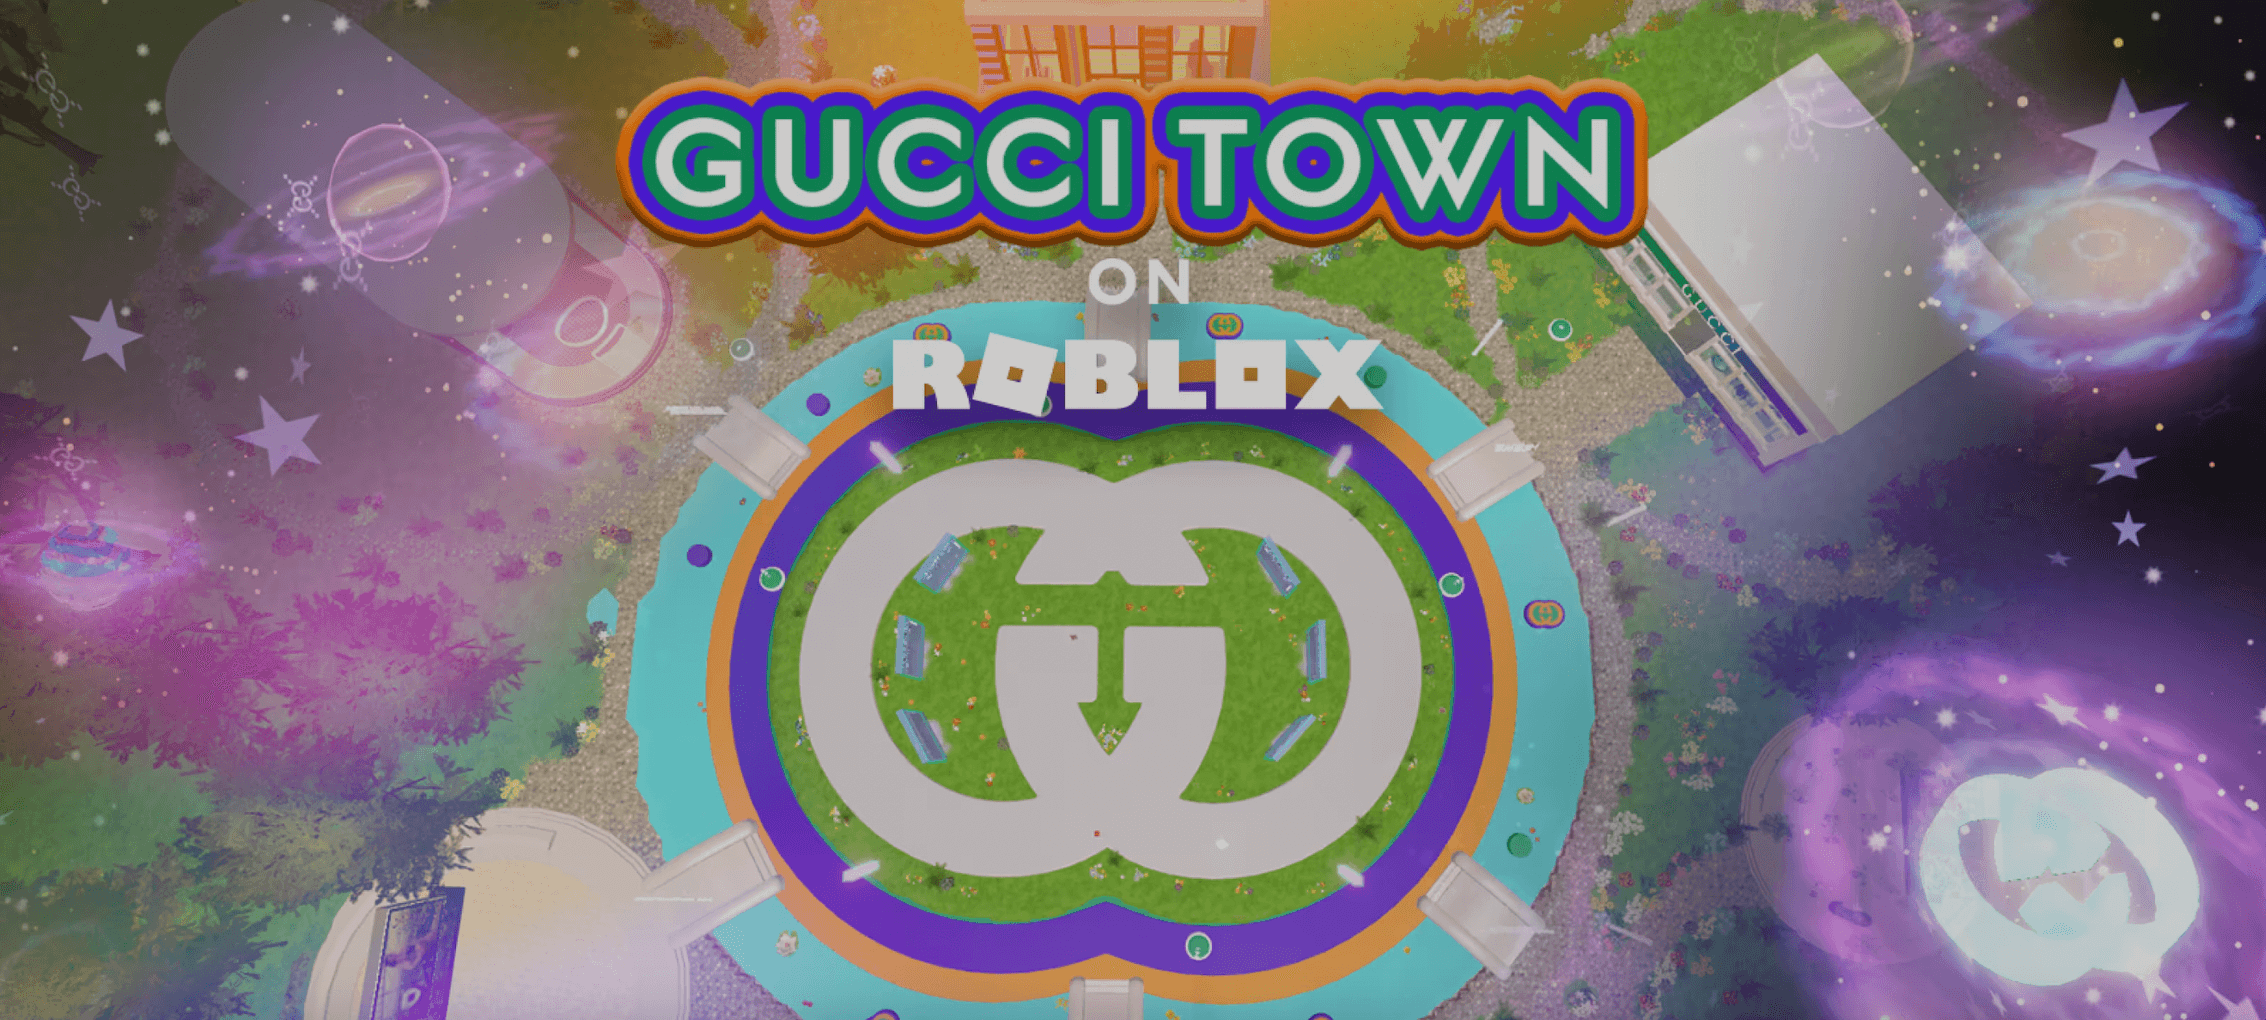 metaverse-business-applications-for-owned-land-gucci-town-on-roblox-example-2